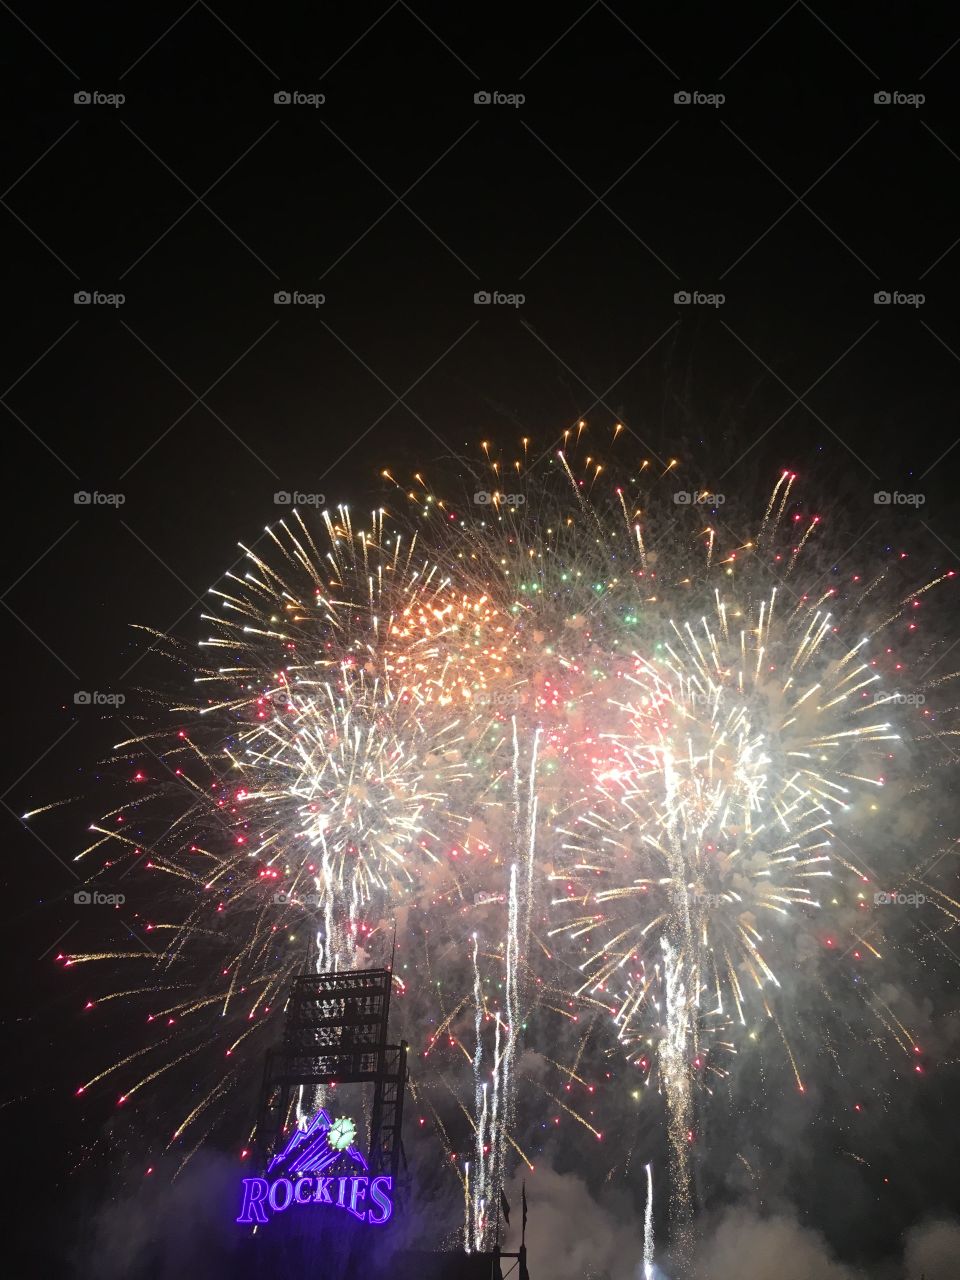 All I see are Fireworks!